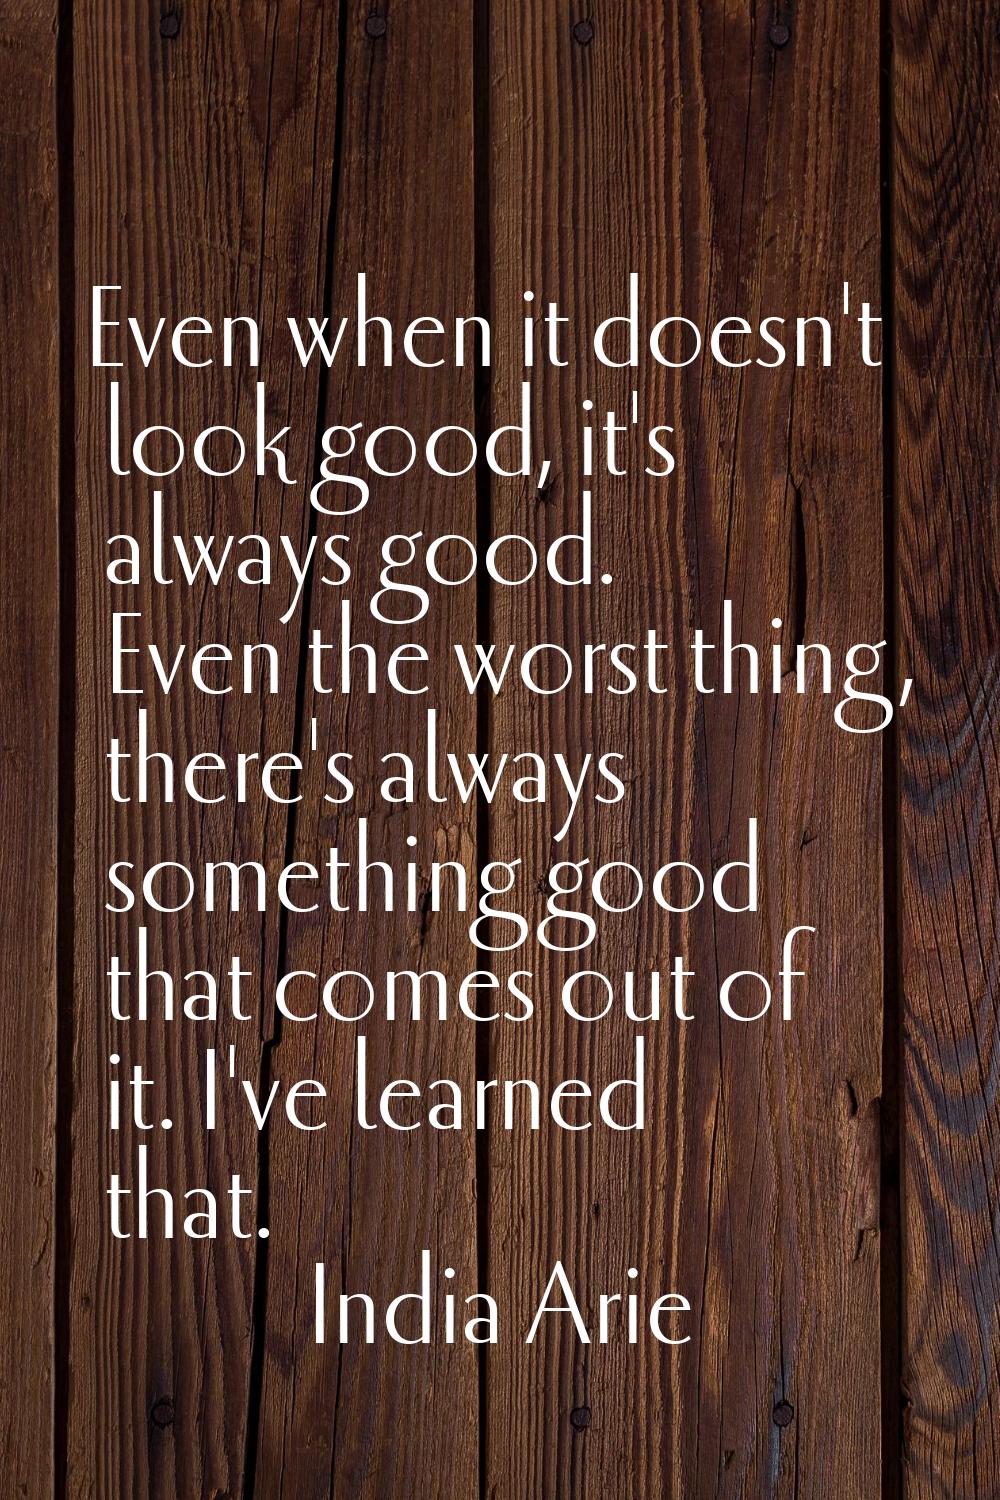 Even when it doesn't look good, it's always good. Even the worst thing, there's always something go